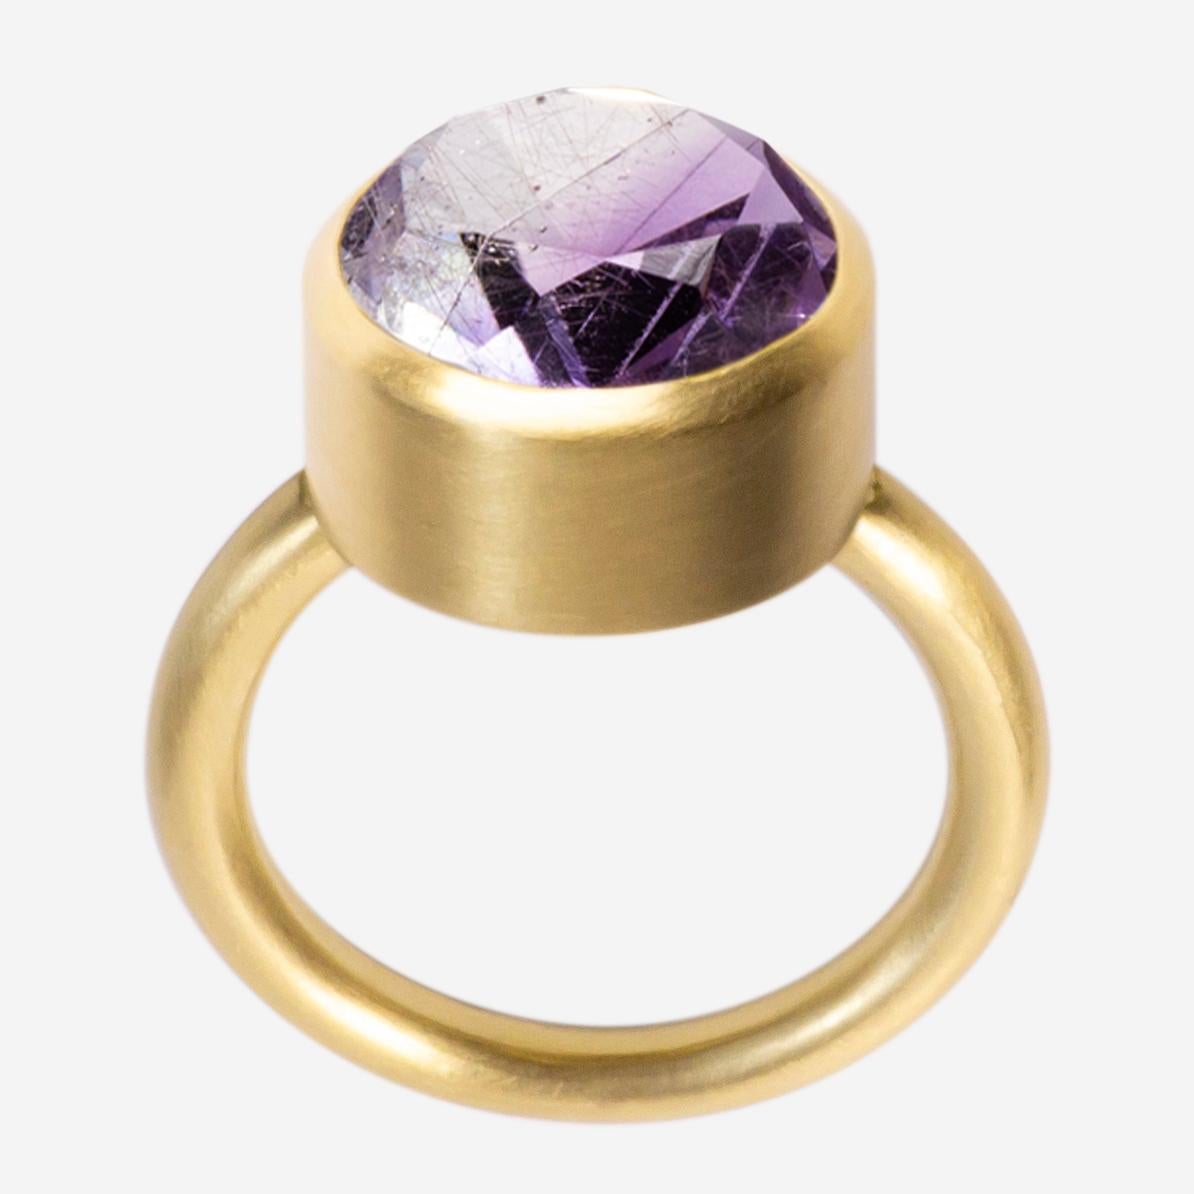 This bold and minimal statement ring is a modern take on the cocktail ring. It features a stone that is fashioned from two natural colored stones that have been fused together then cut and polished as one. When the two characteristics of the